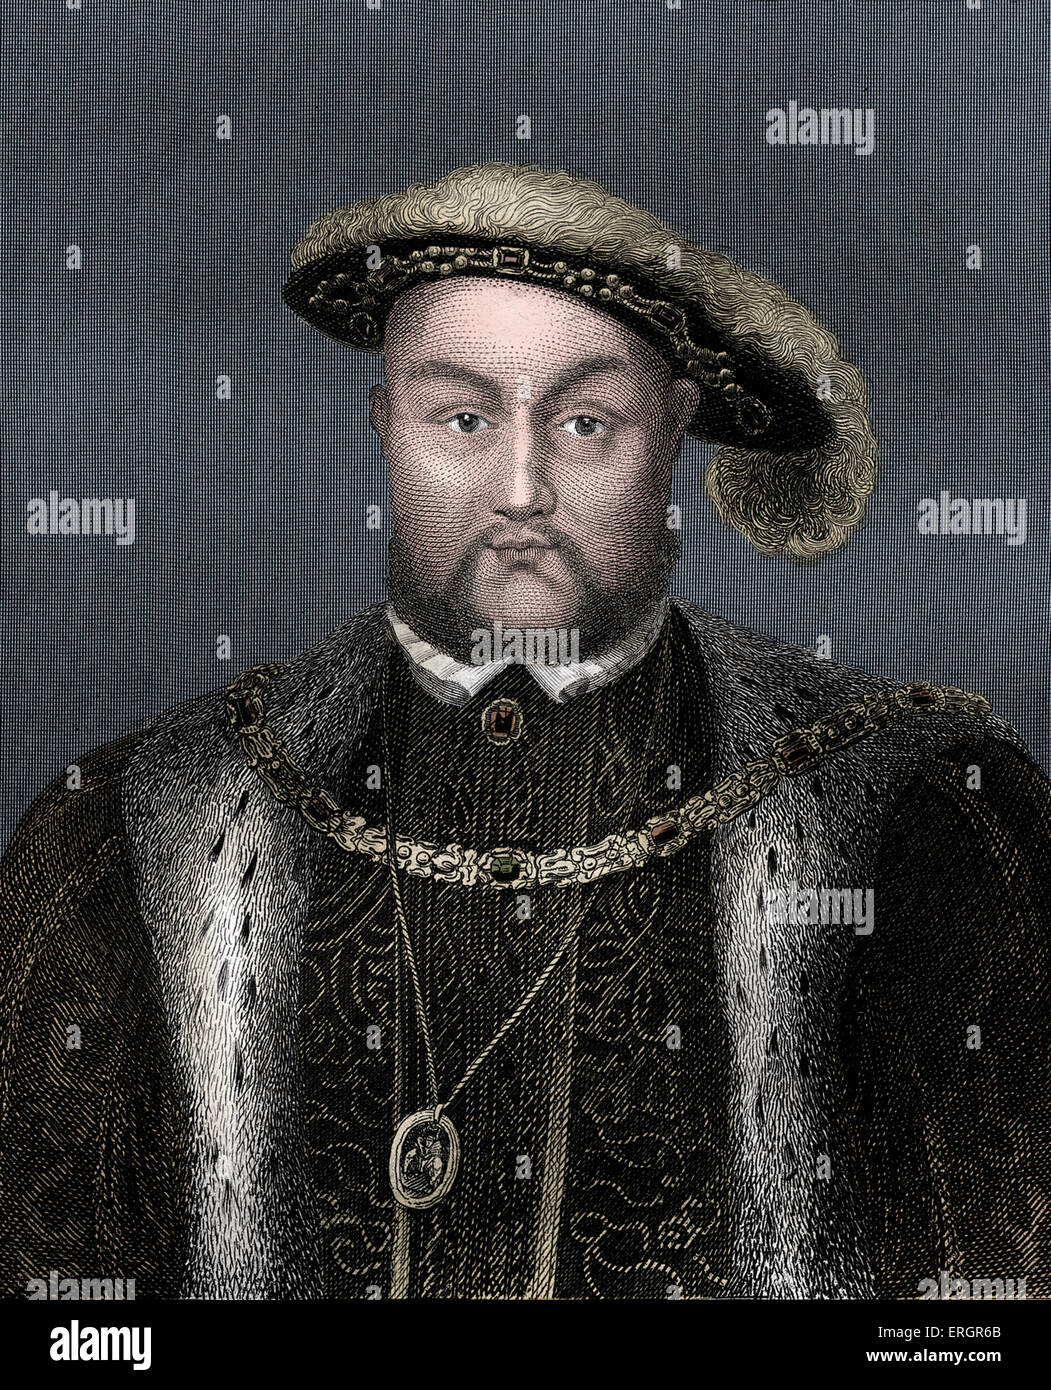 Henry Viii Portrait King Of England From 21 April 1509 Until His